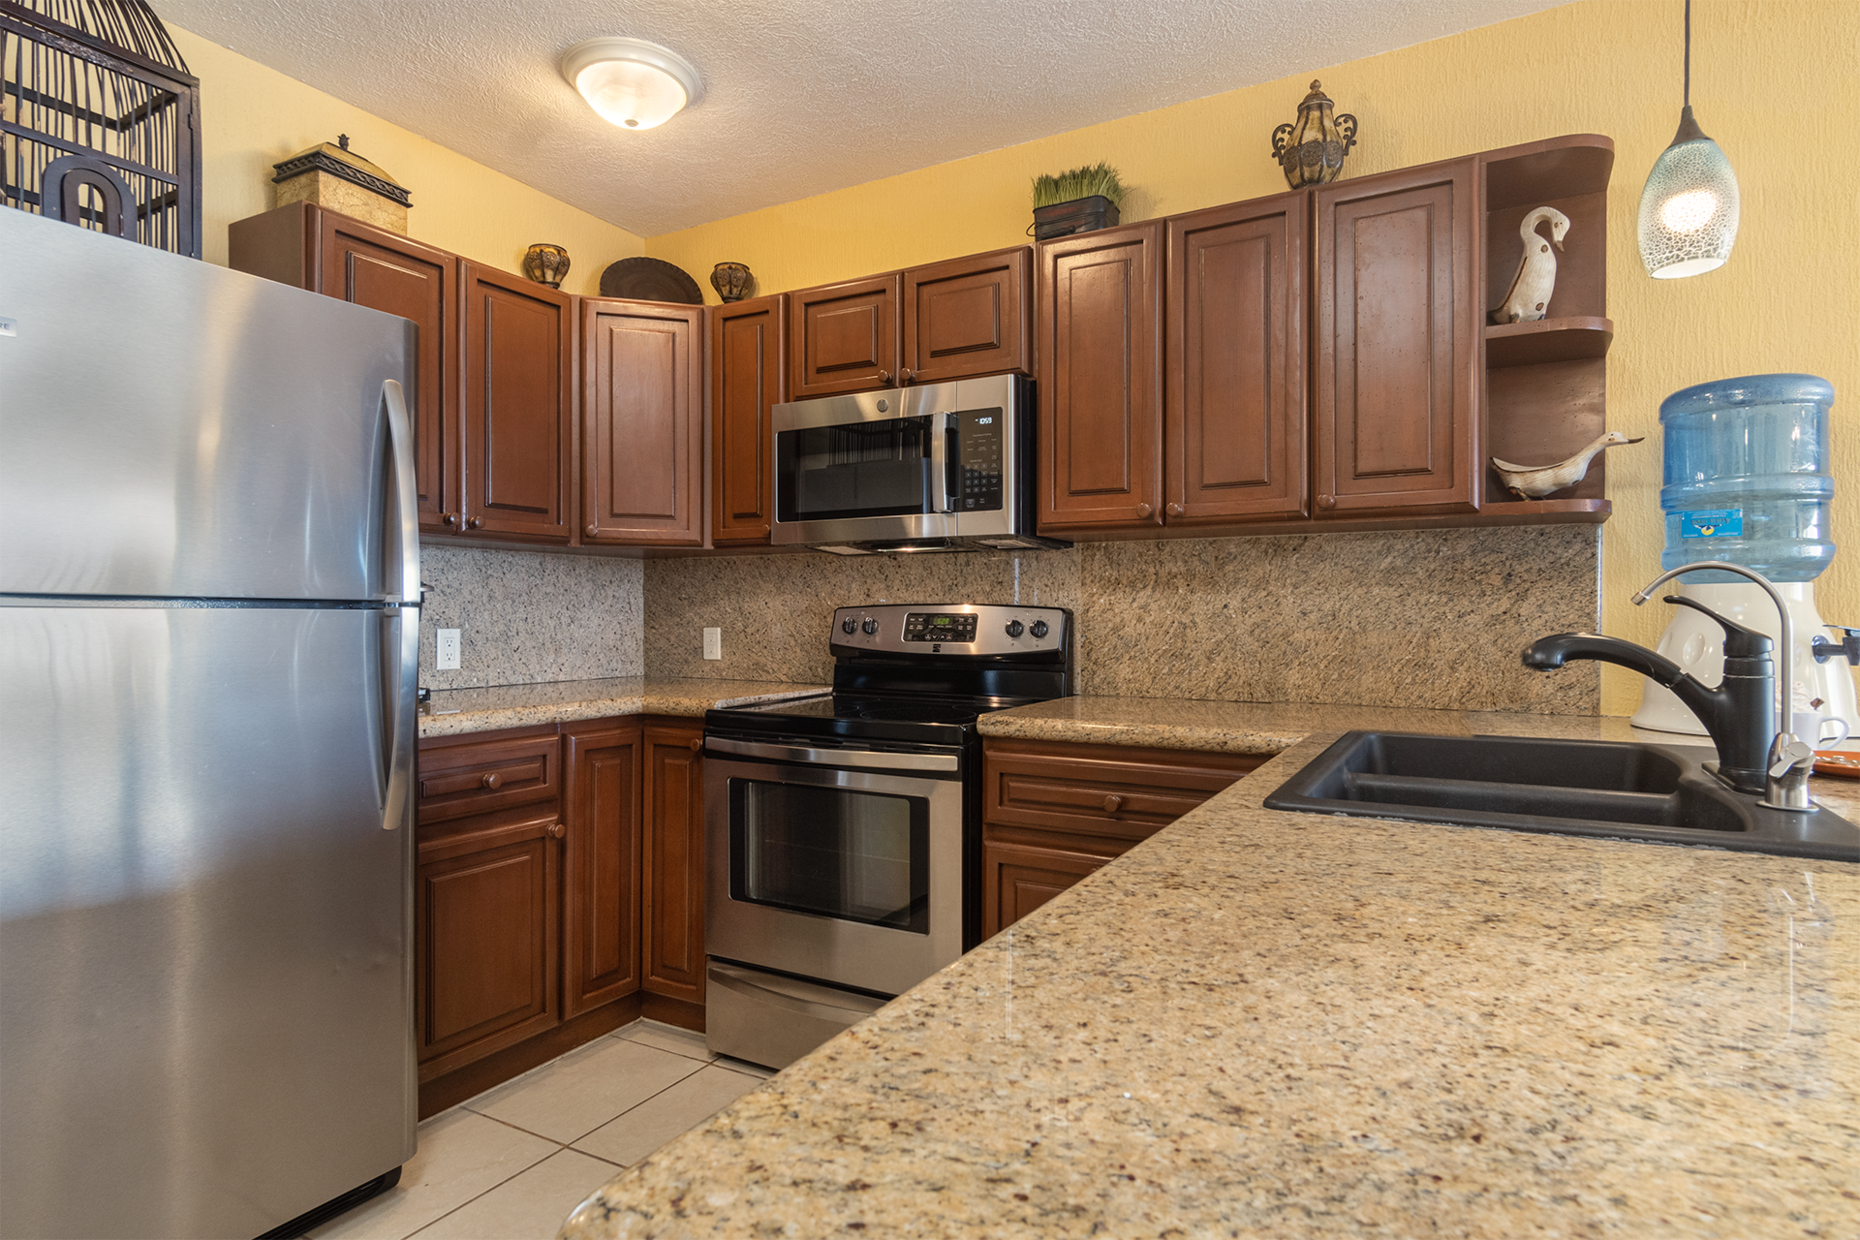 The kitchen is ample and just right for an extended stay